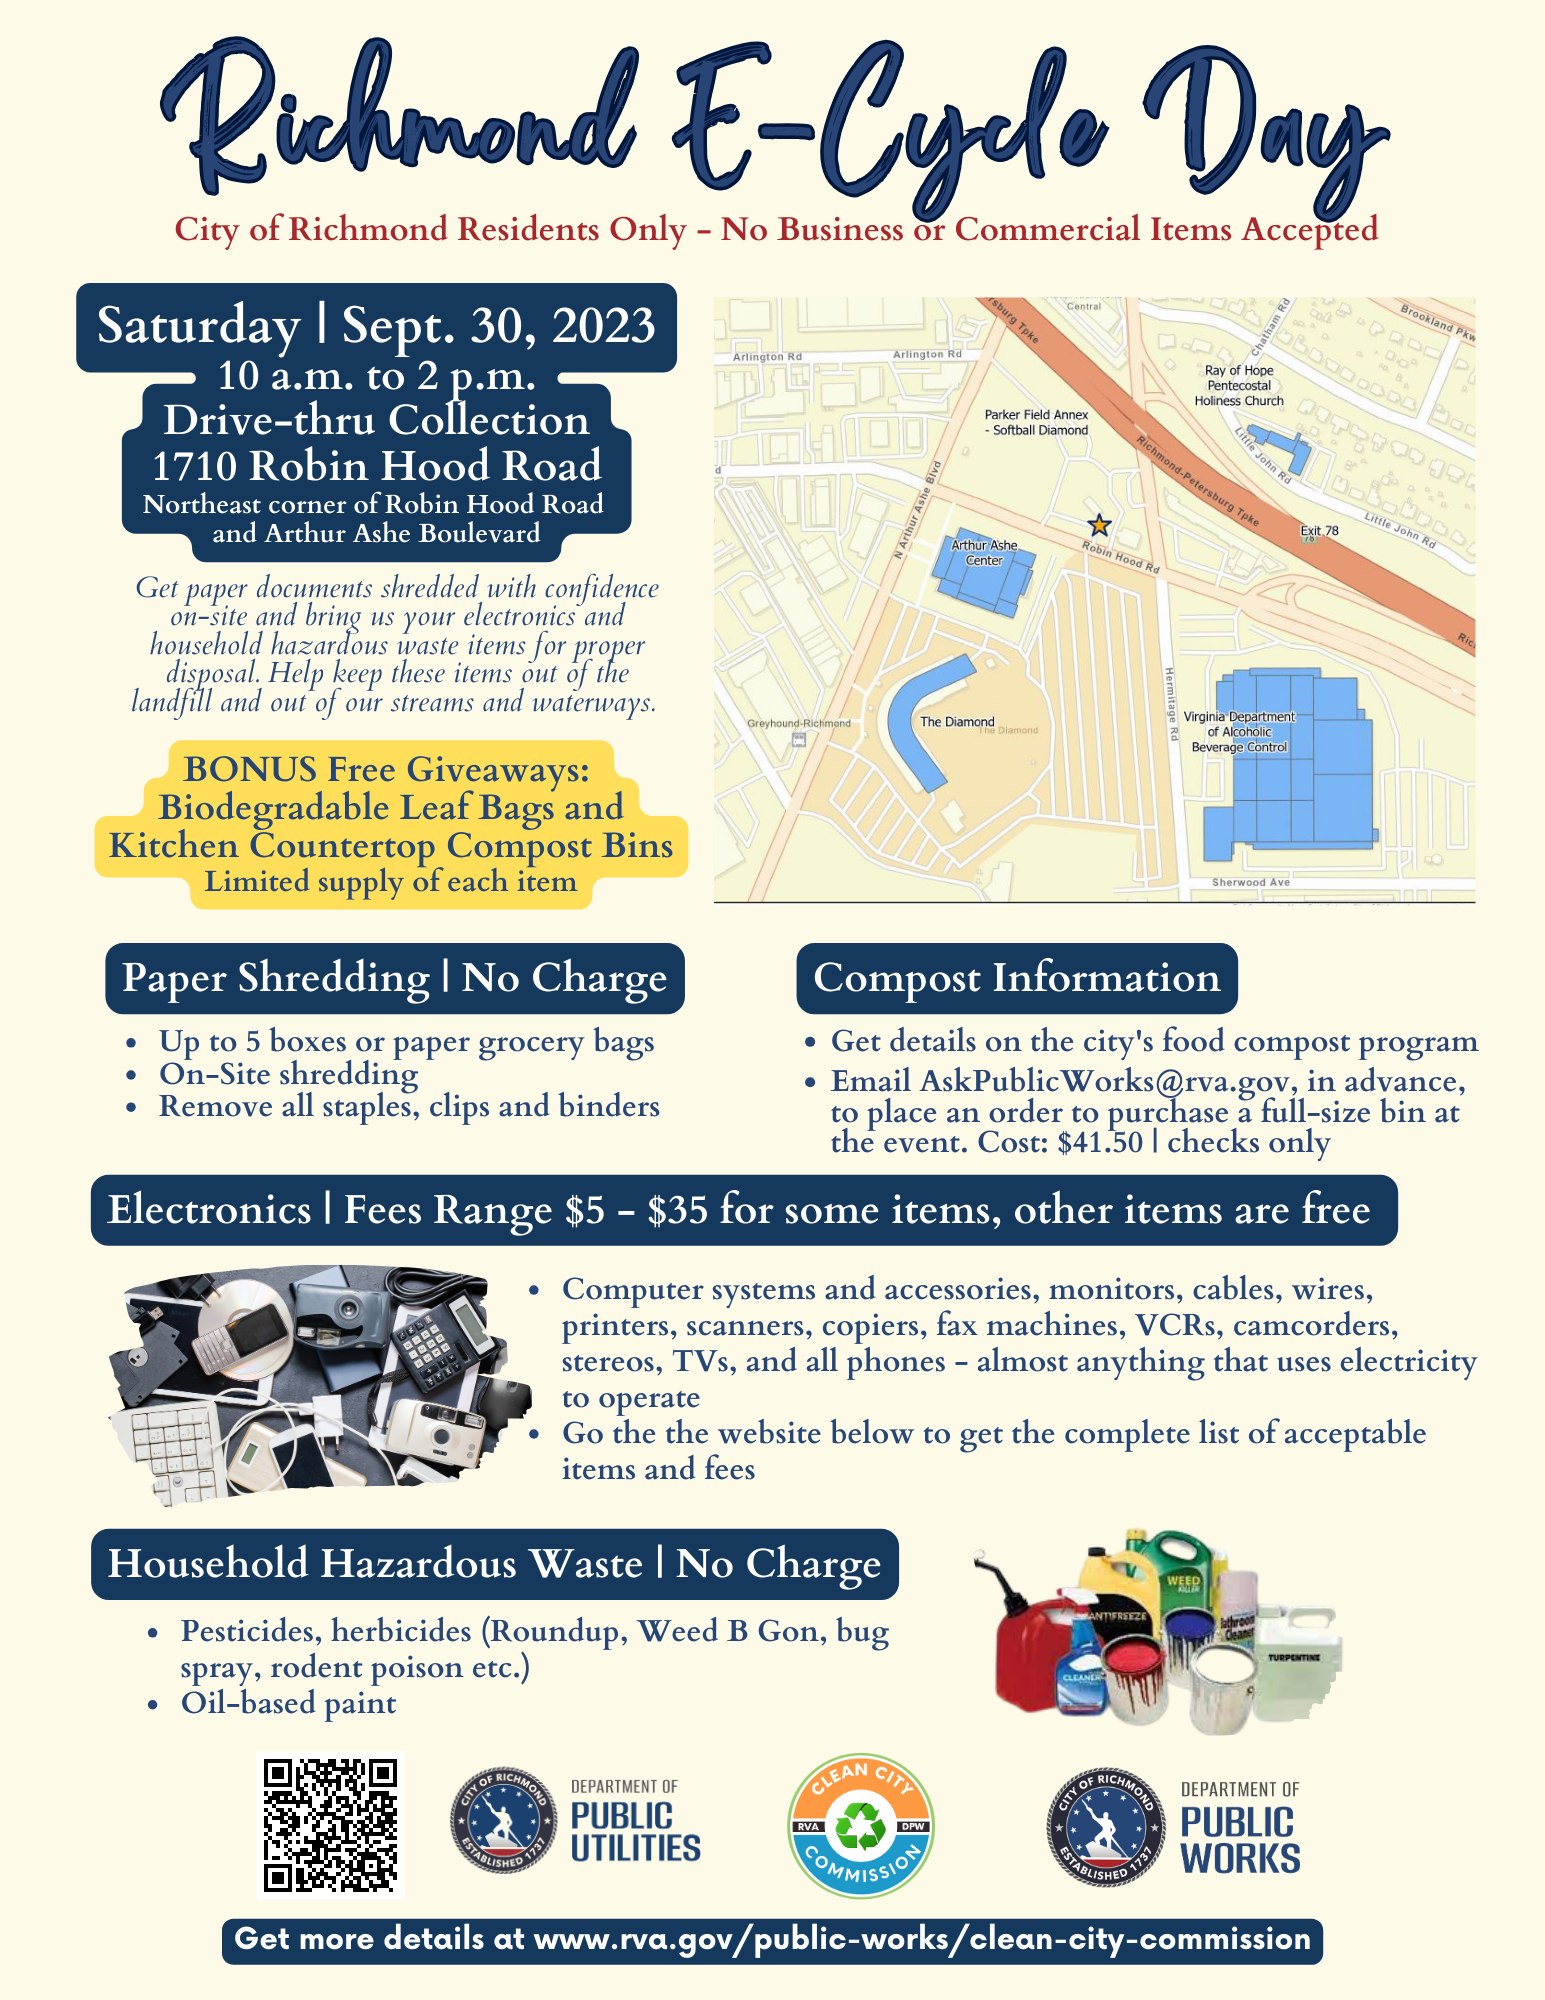 Image - Richmond E-Cycle Event - Saturday, September 30, 2023